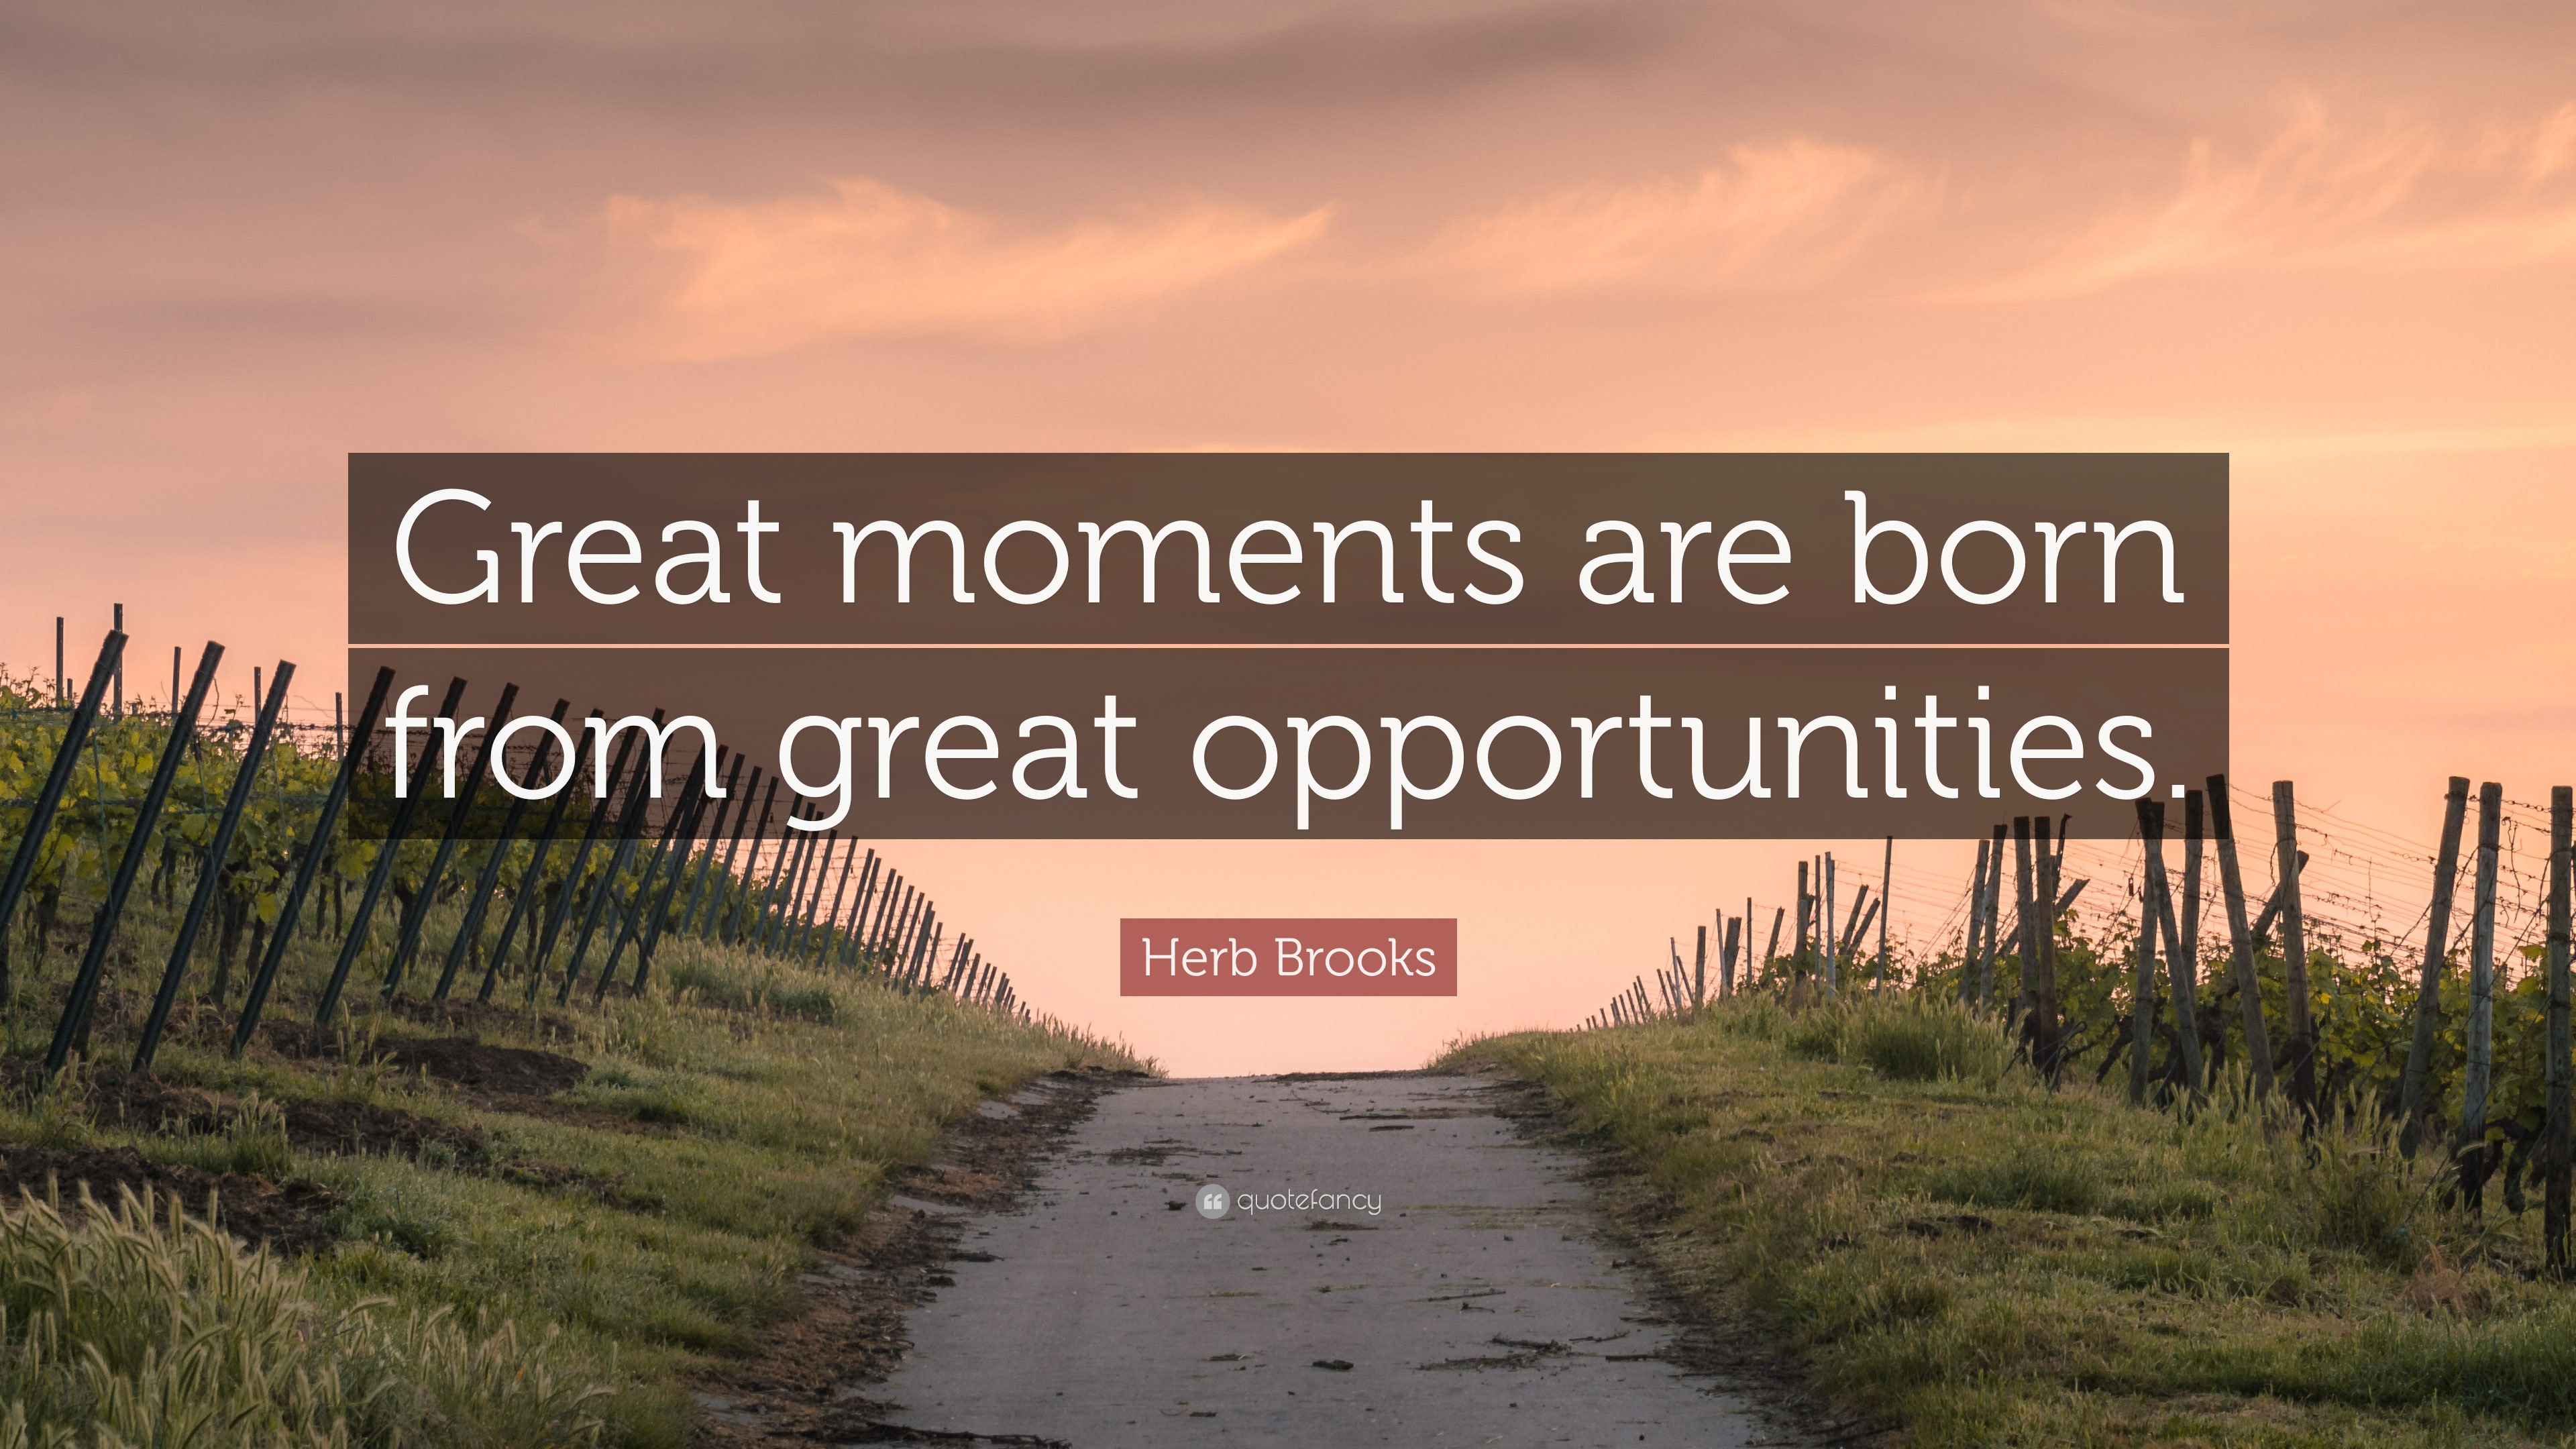 Herb Brooks Quote: “Great moments are born from great opportunities.”